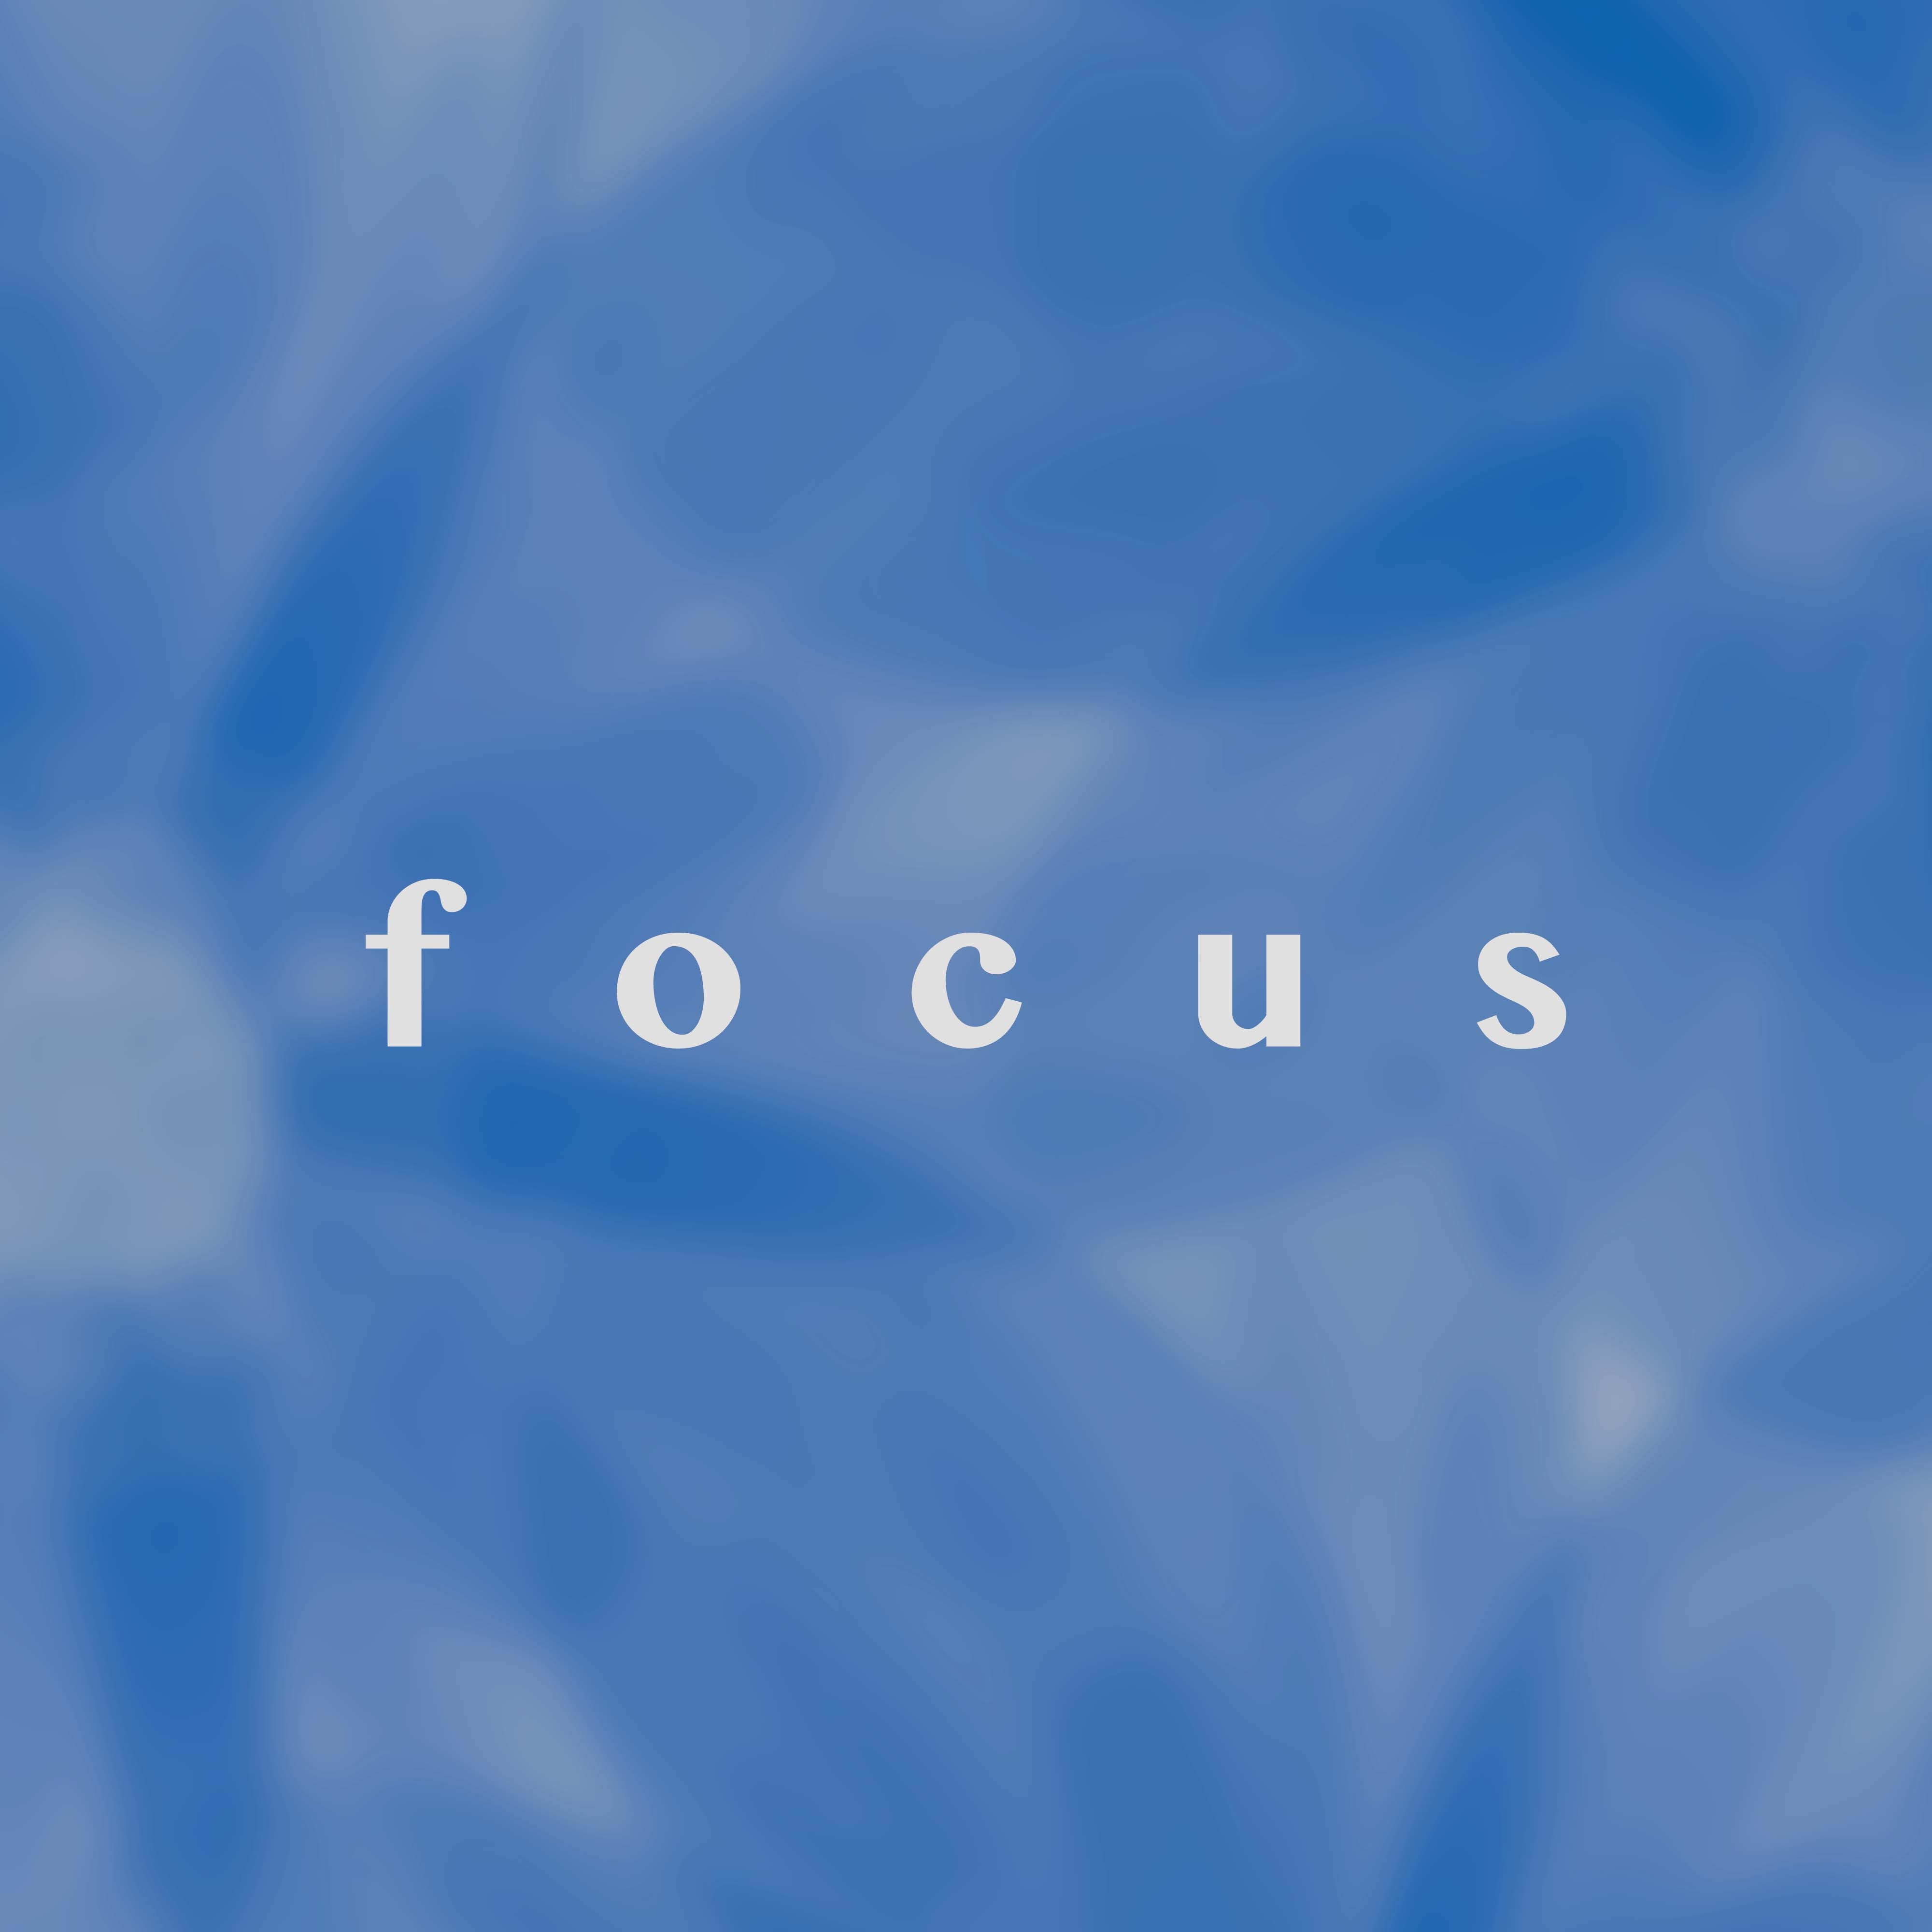 Focus - Soundtrack, Study Music to Improve Concentration and Learning